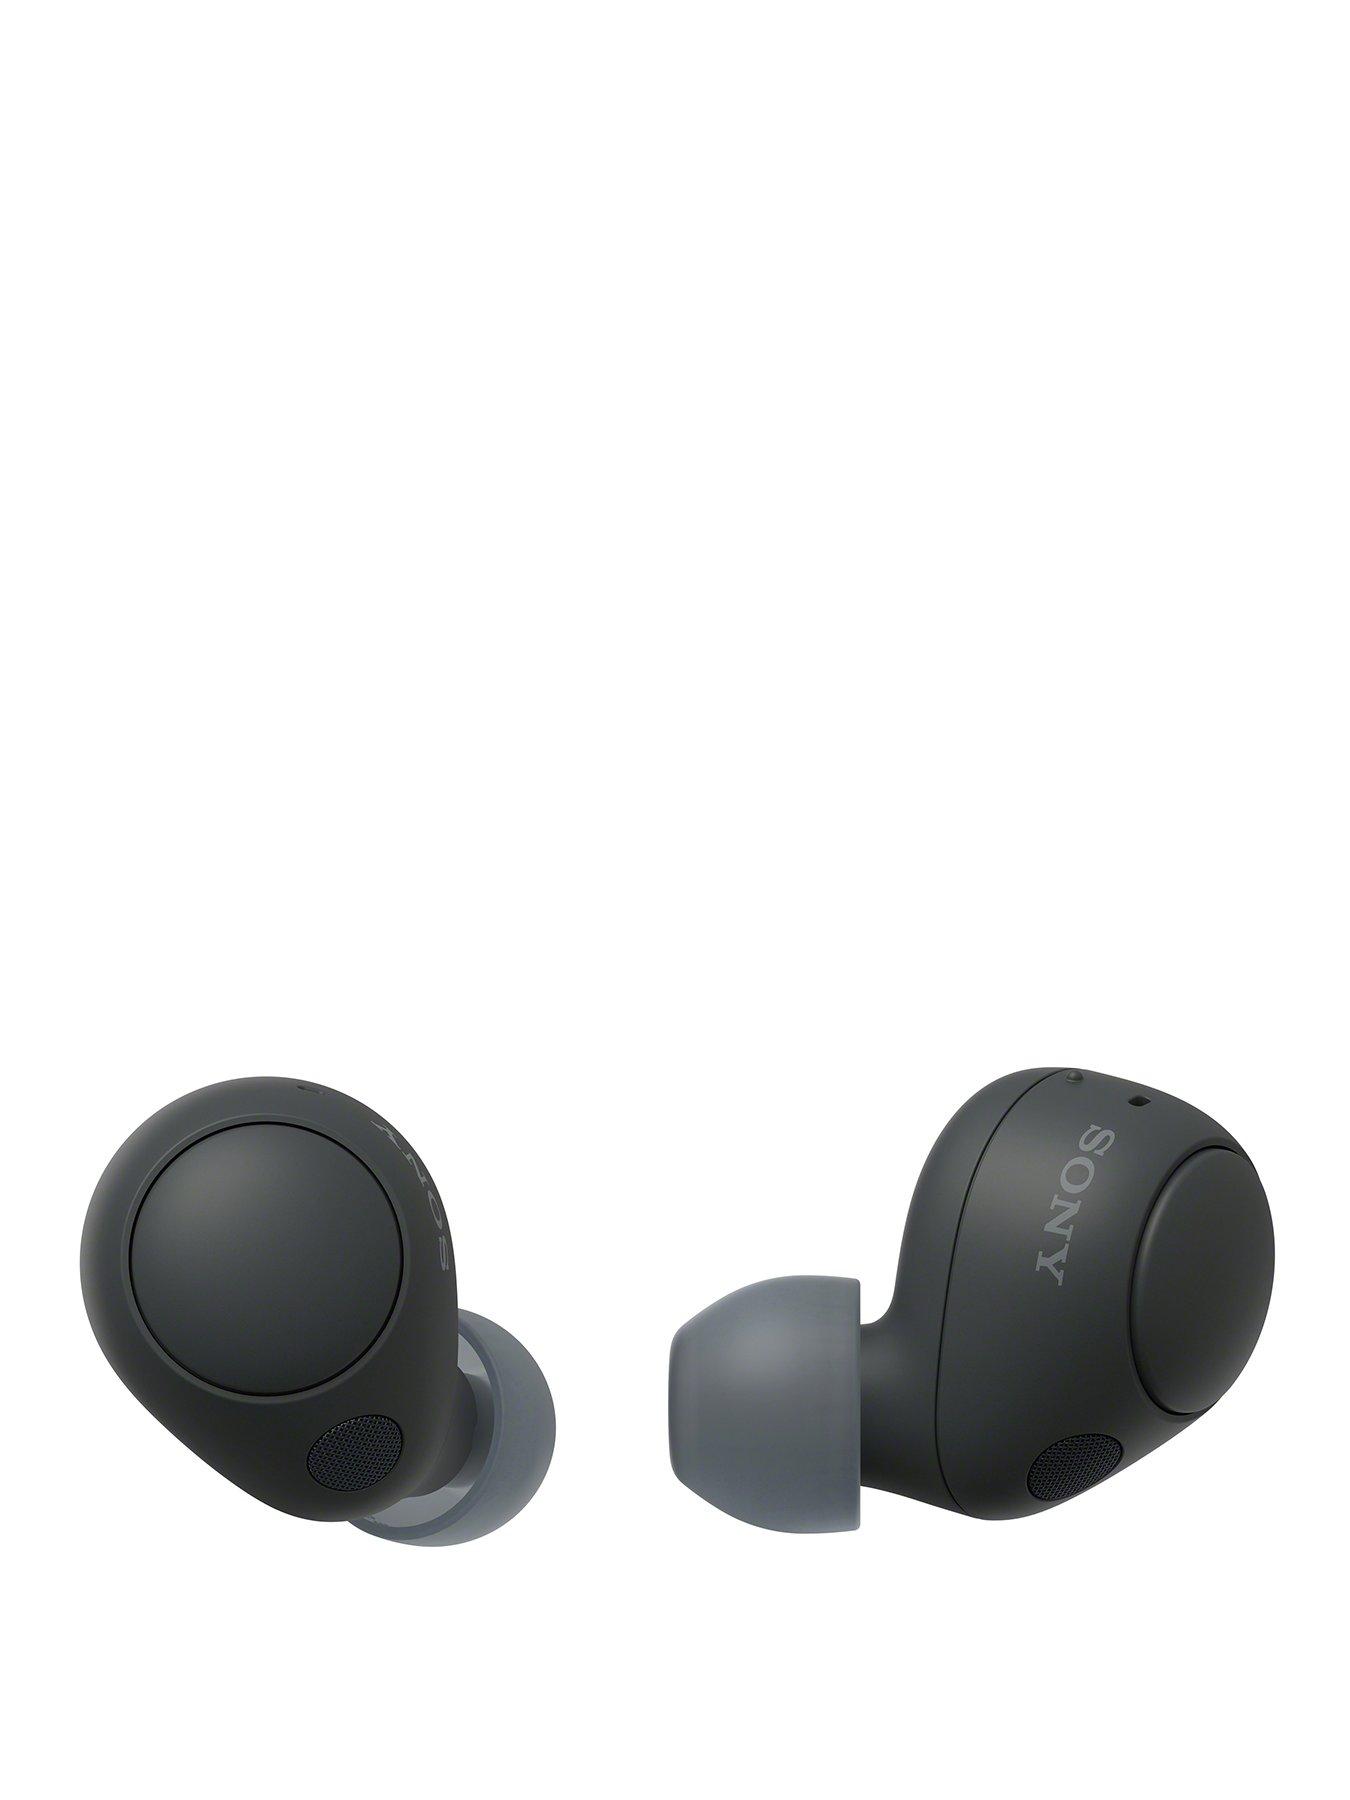 Sony WF-C700N True Wireless Noise Cancelling Earbuds - All-day